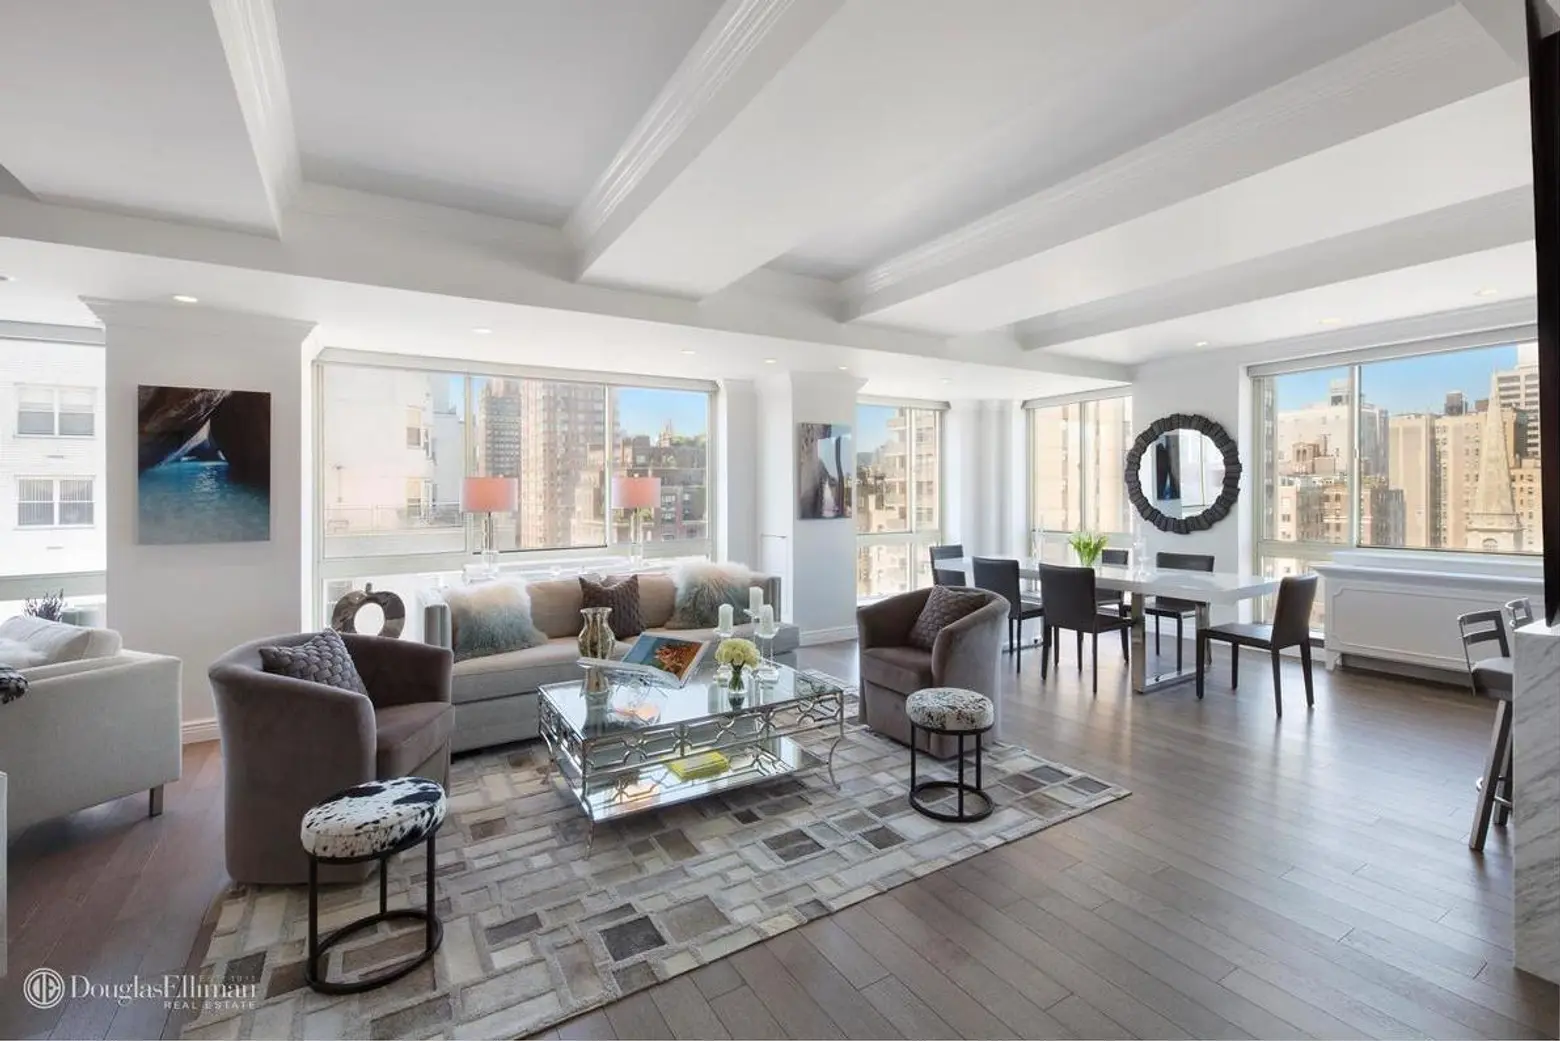 ‘Real Housewives’ Ramona Singer lists Upper East Side pad for $5M